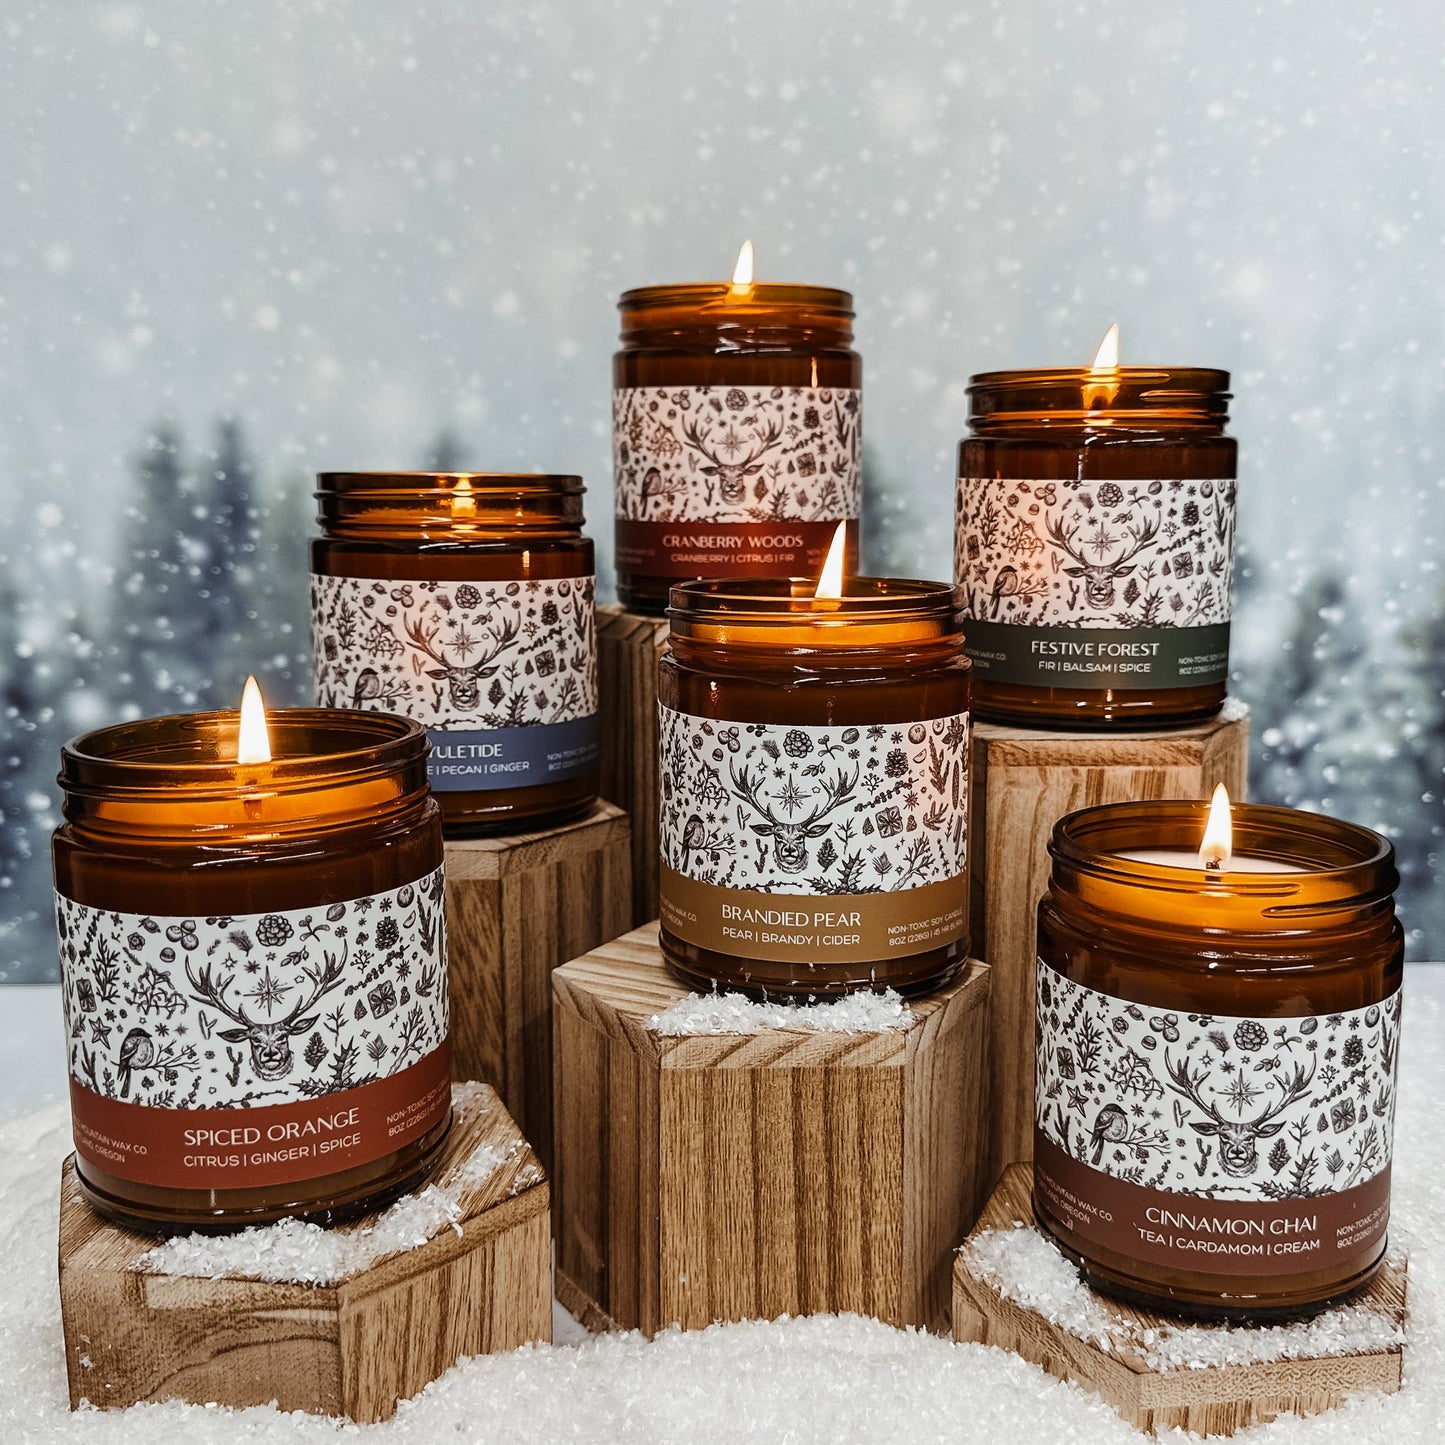 Festive Forest Candle